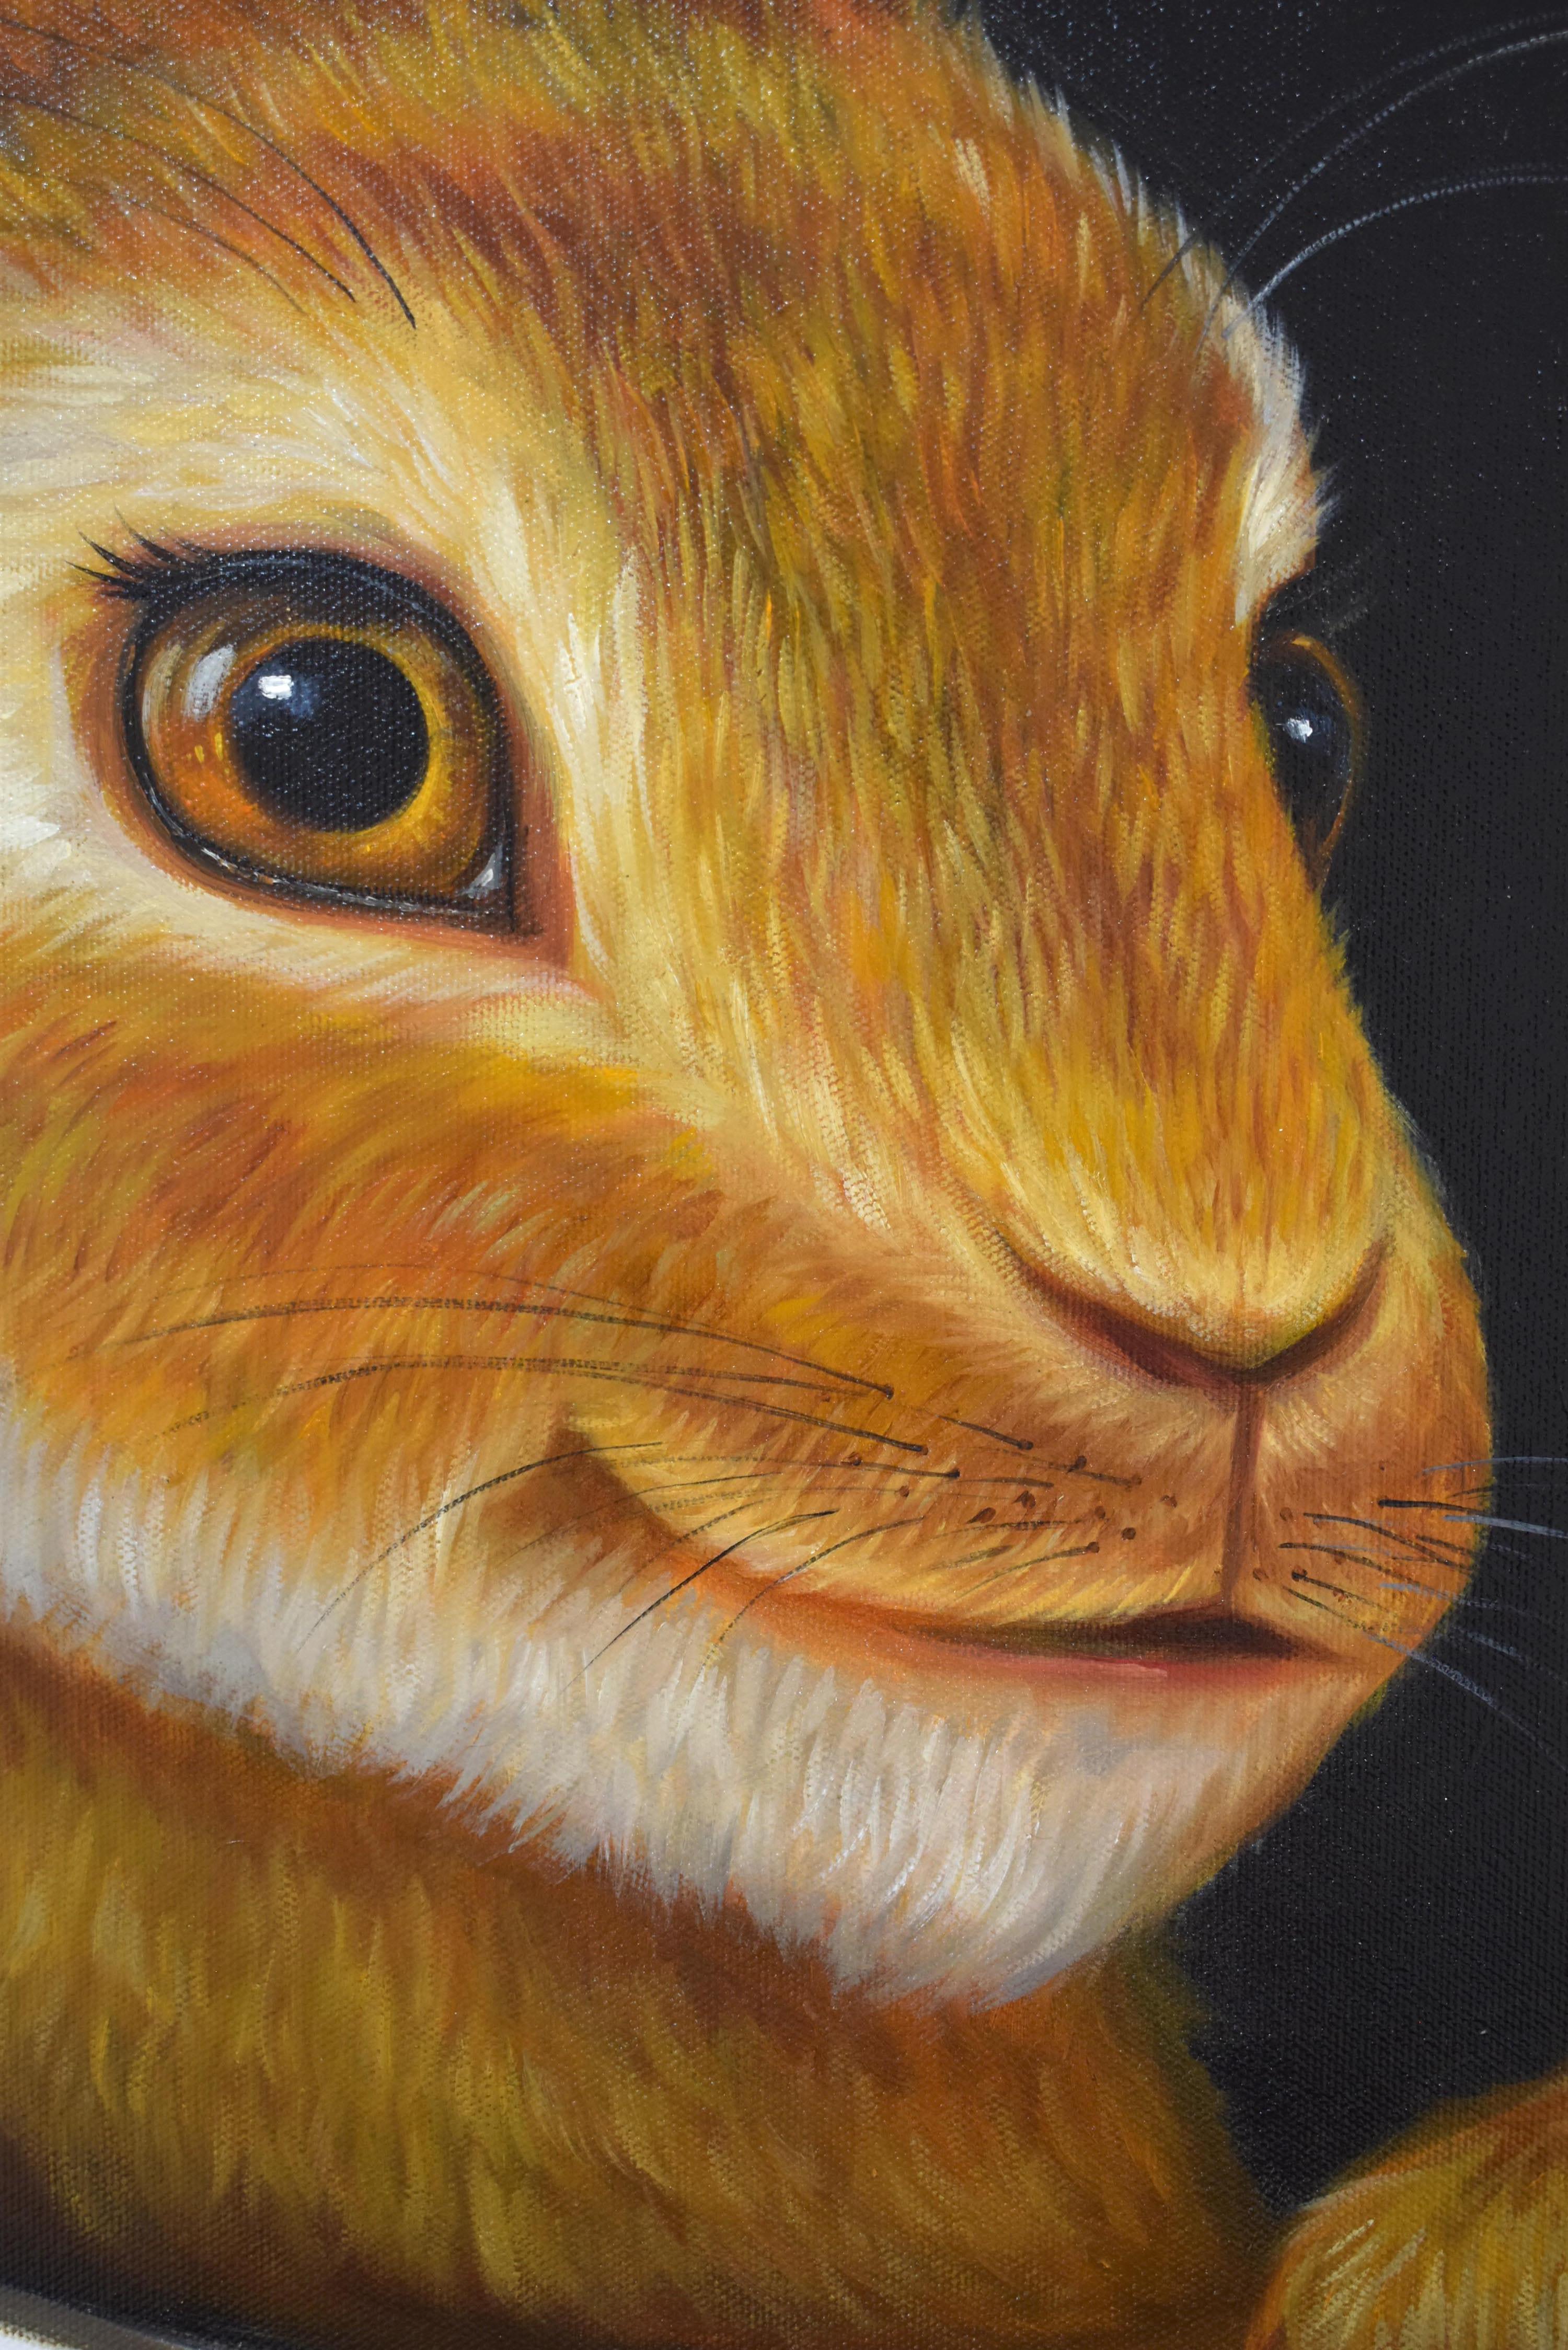 Hare In Hole 5. Rabbit looking Through a Hole. Adorable rabbit Oil painting - Painting by Lingee Bangkhuntod